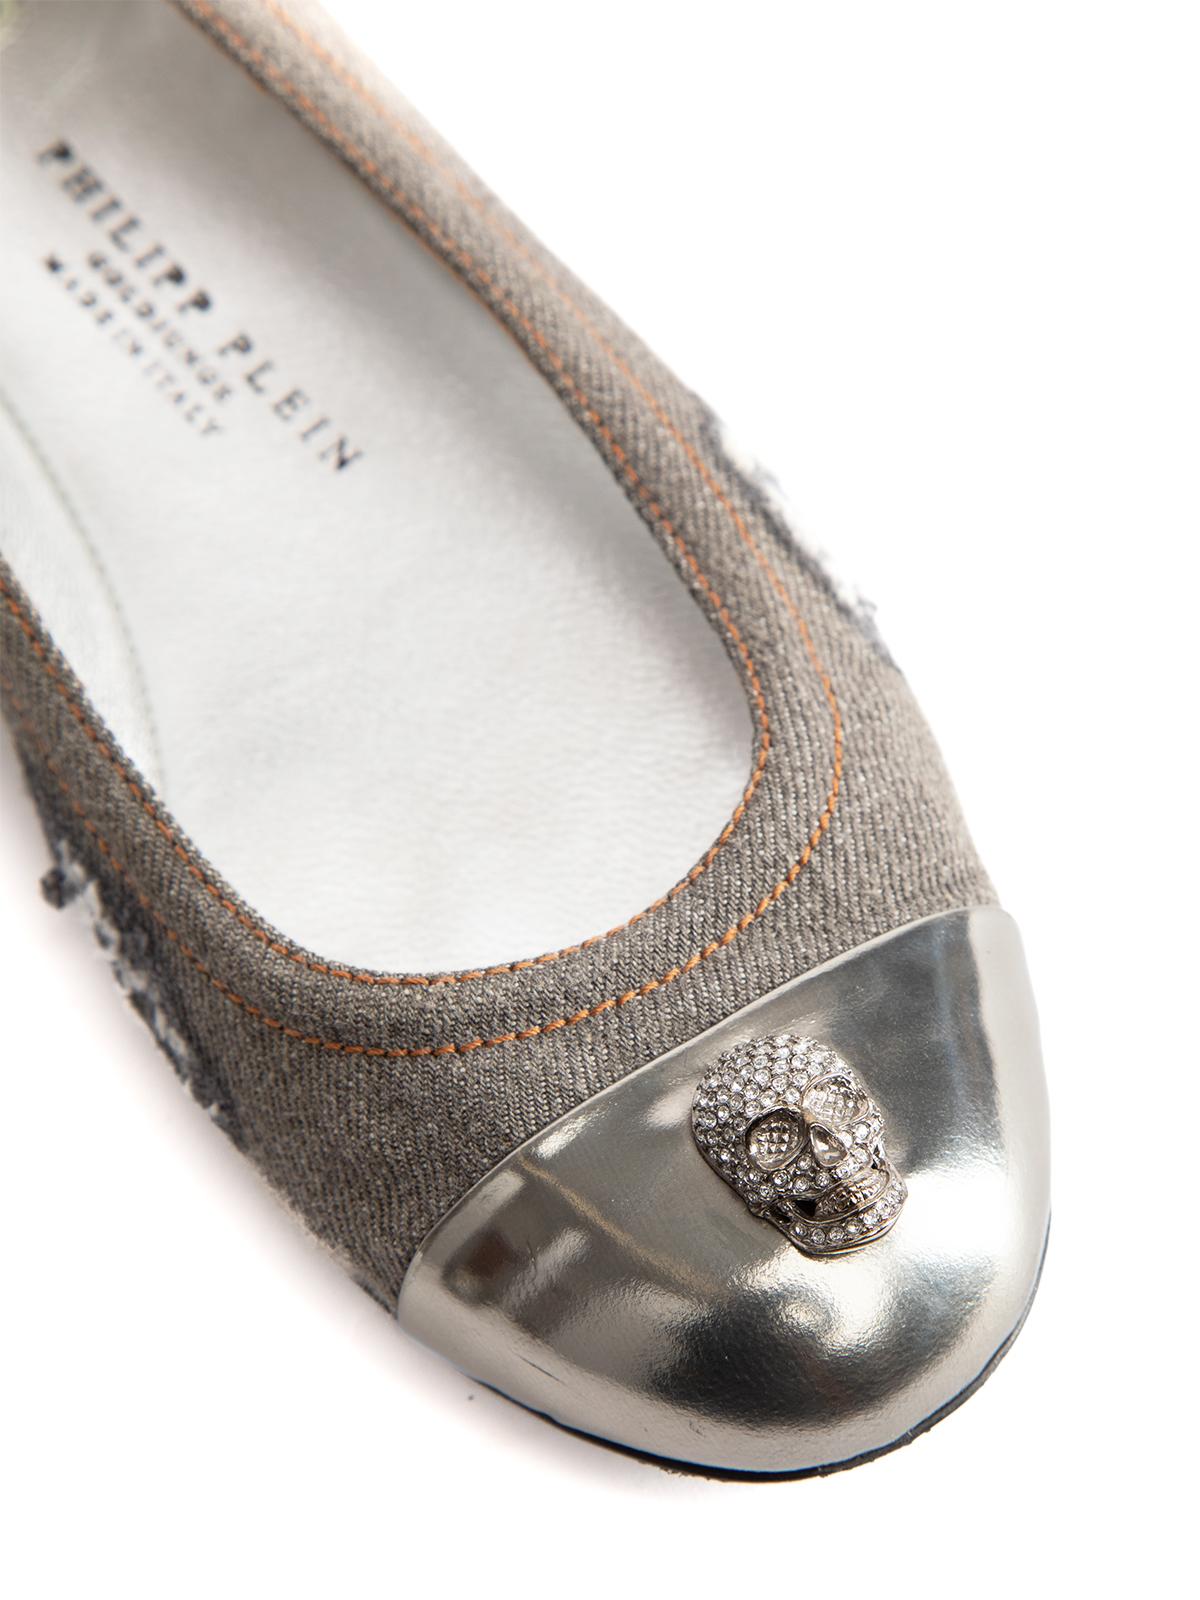 Pre-Loved Philipp Plein Women's Denim Ballet Flats with Patent Toe Cap In Excellent Condition In London, GB